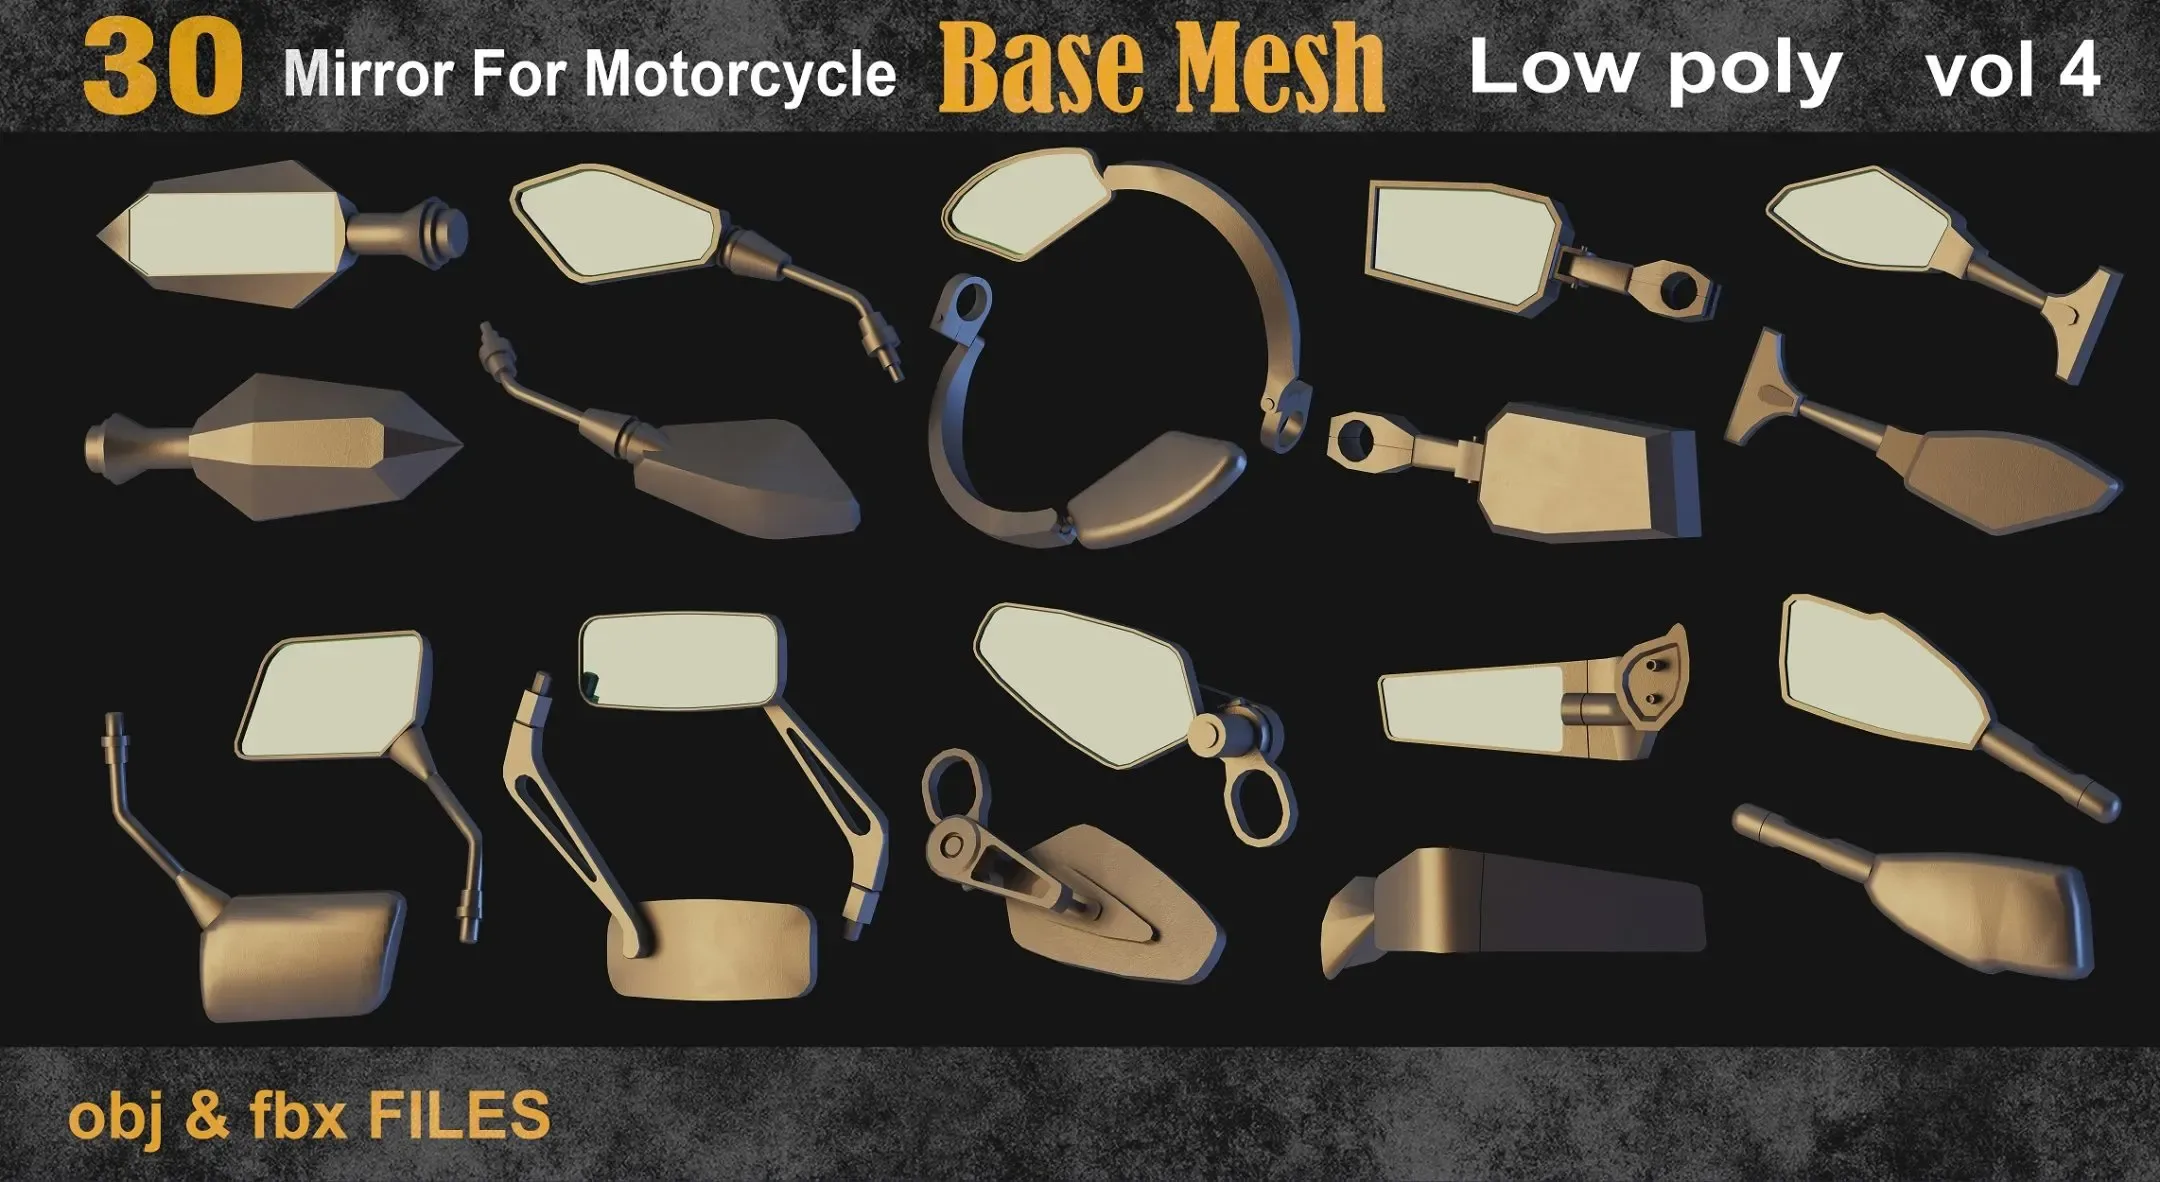 30 Mirror For Motorcycle Base Mesh vol 4